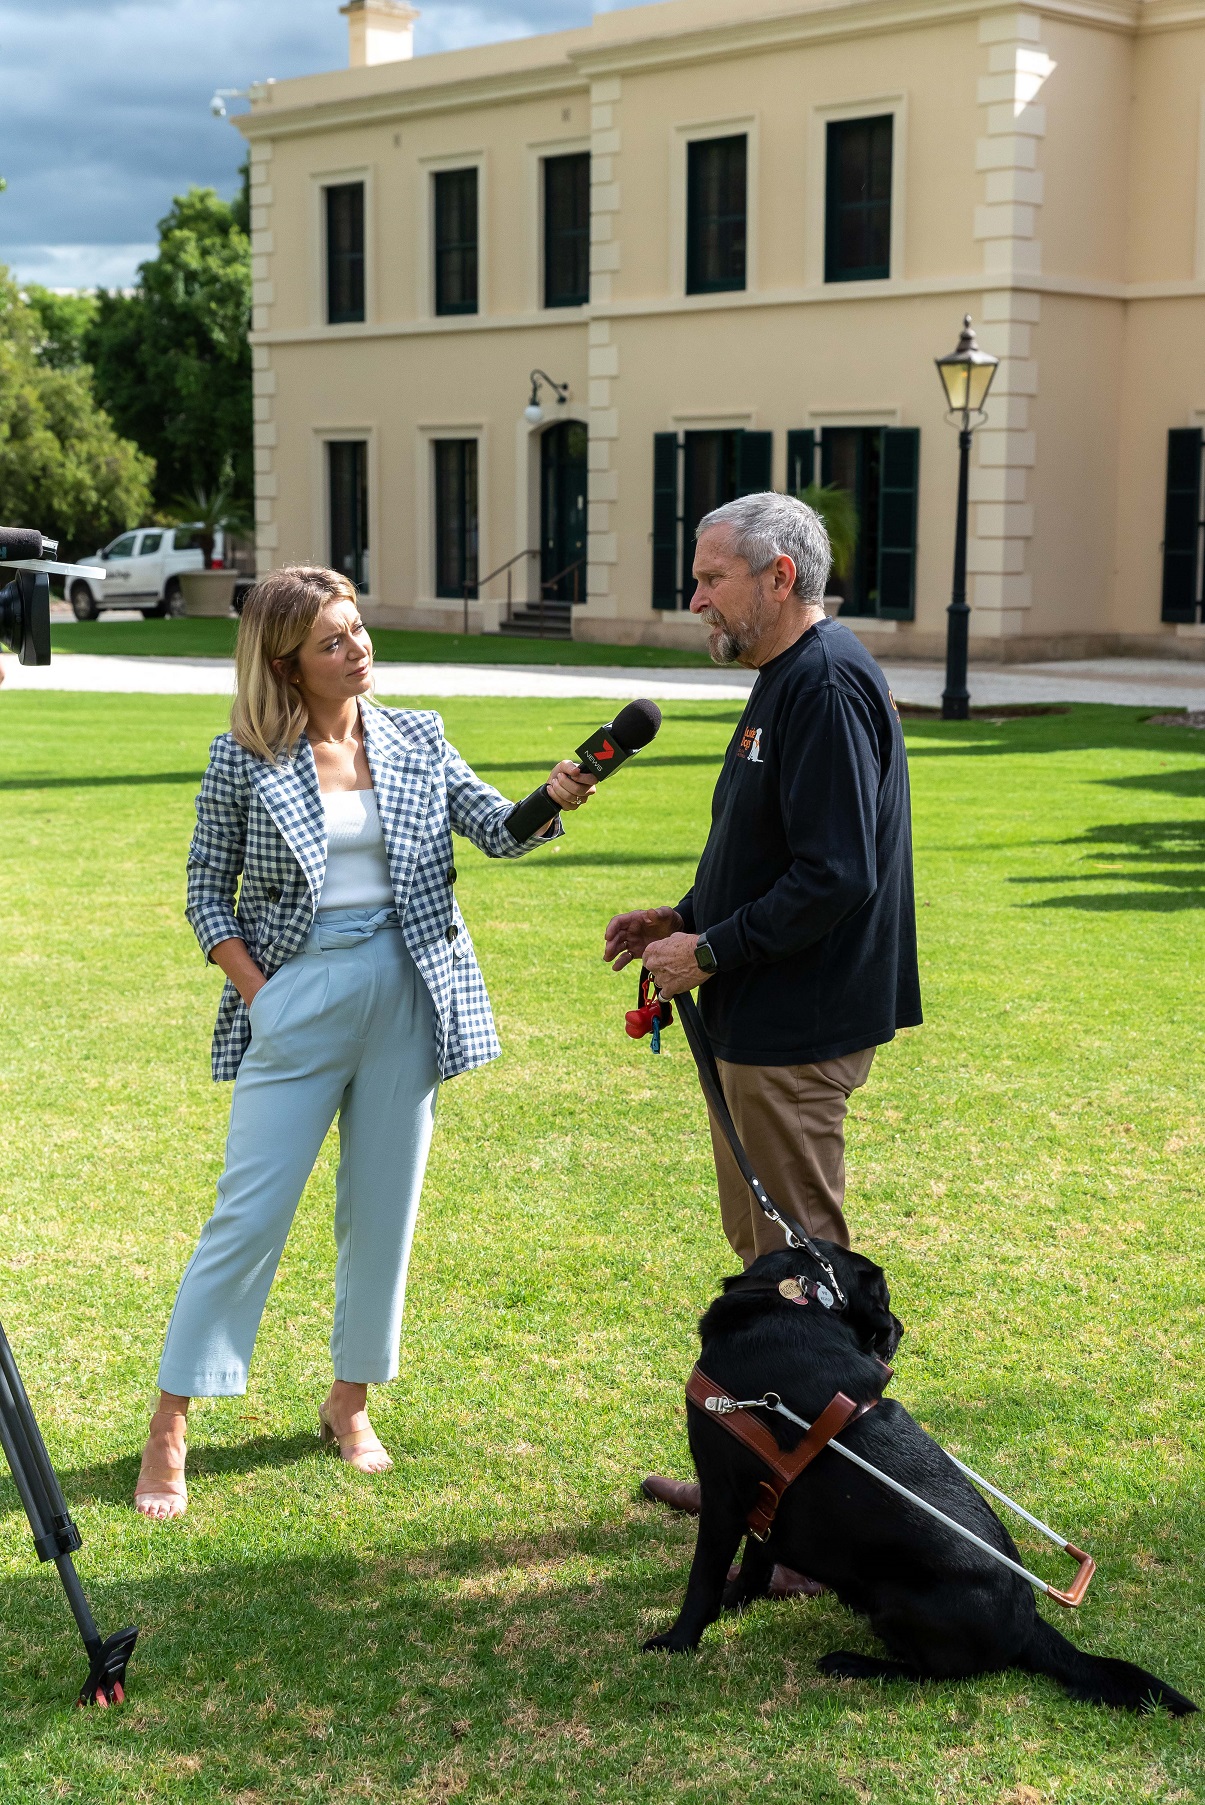 Bruce Ind and Guide Dog Oakland being interviewed by Channel 7 at Government House for International Guide Dog Day 2022.